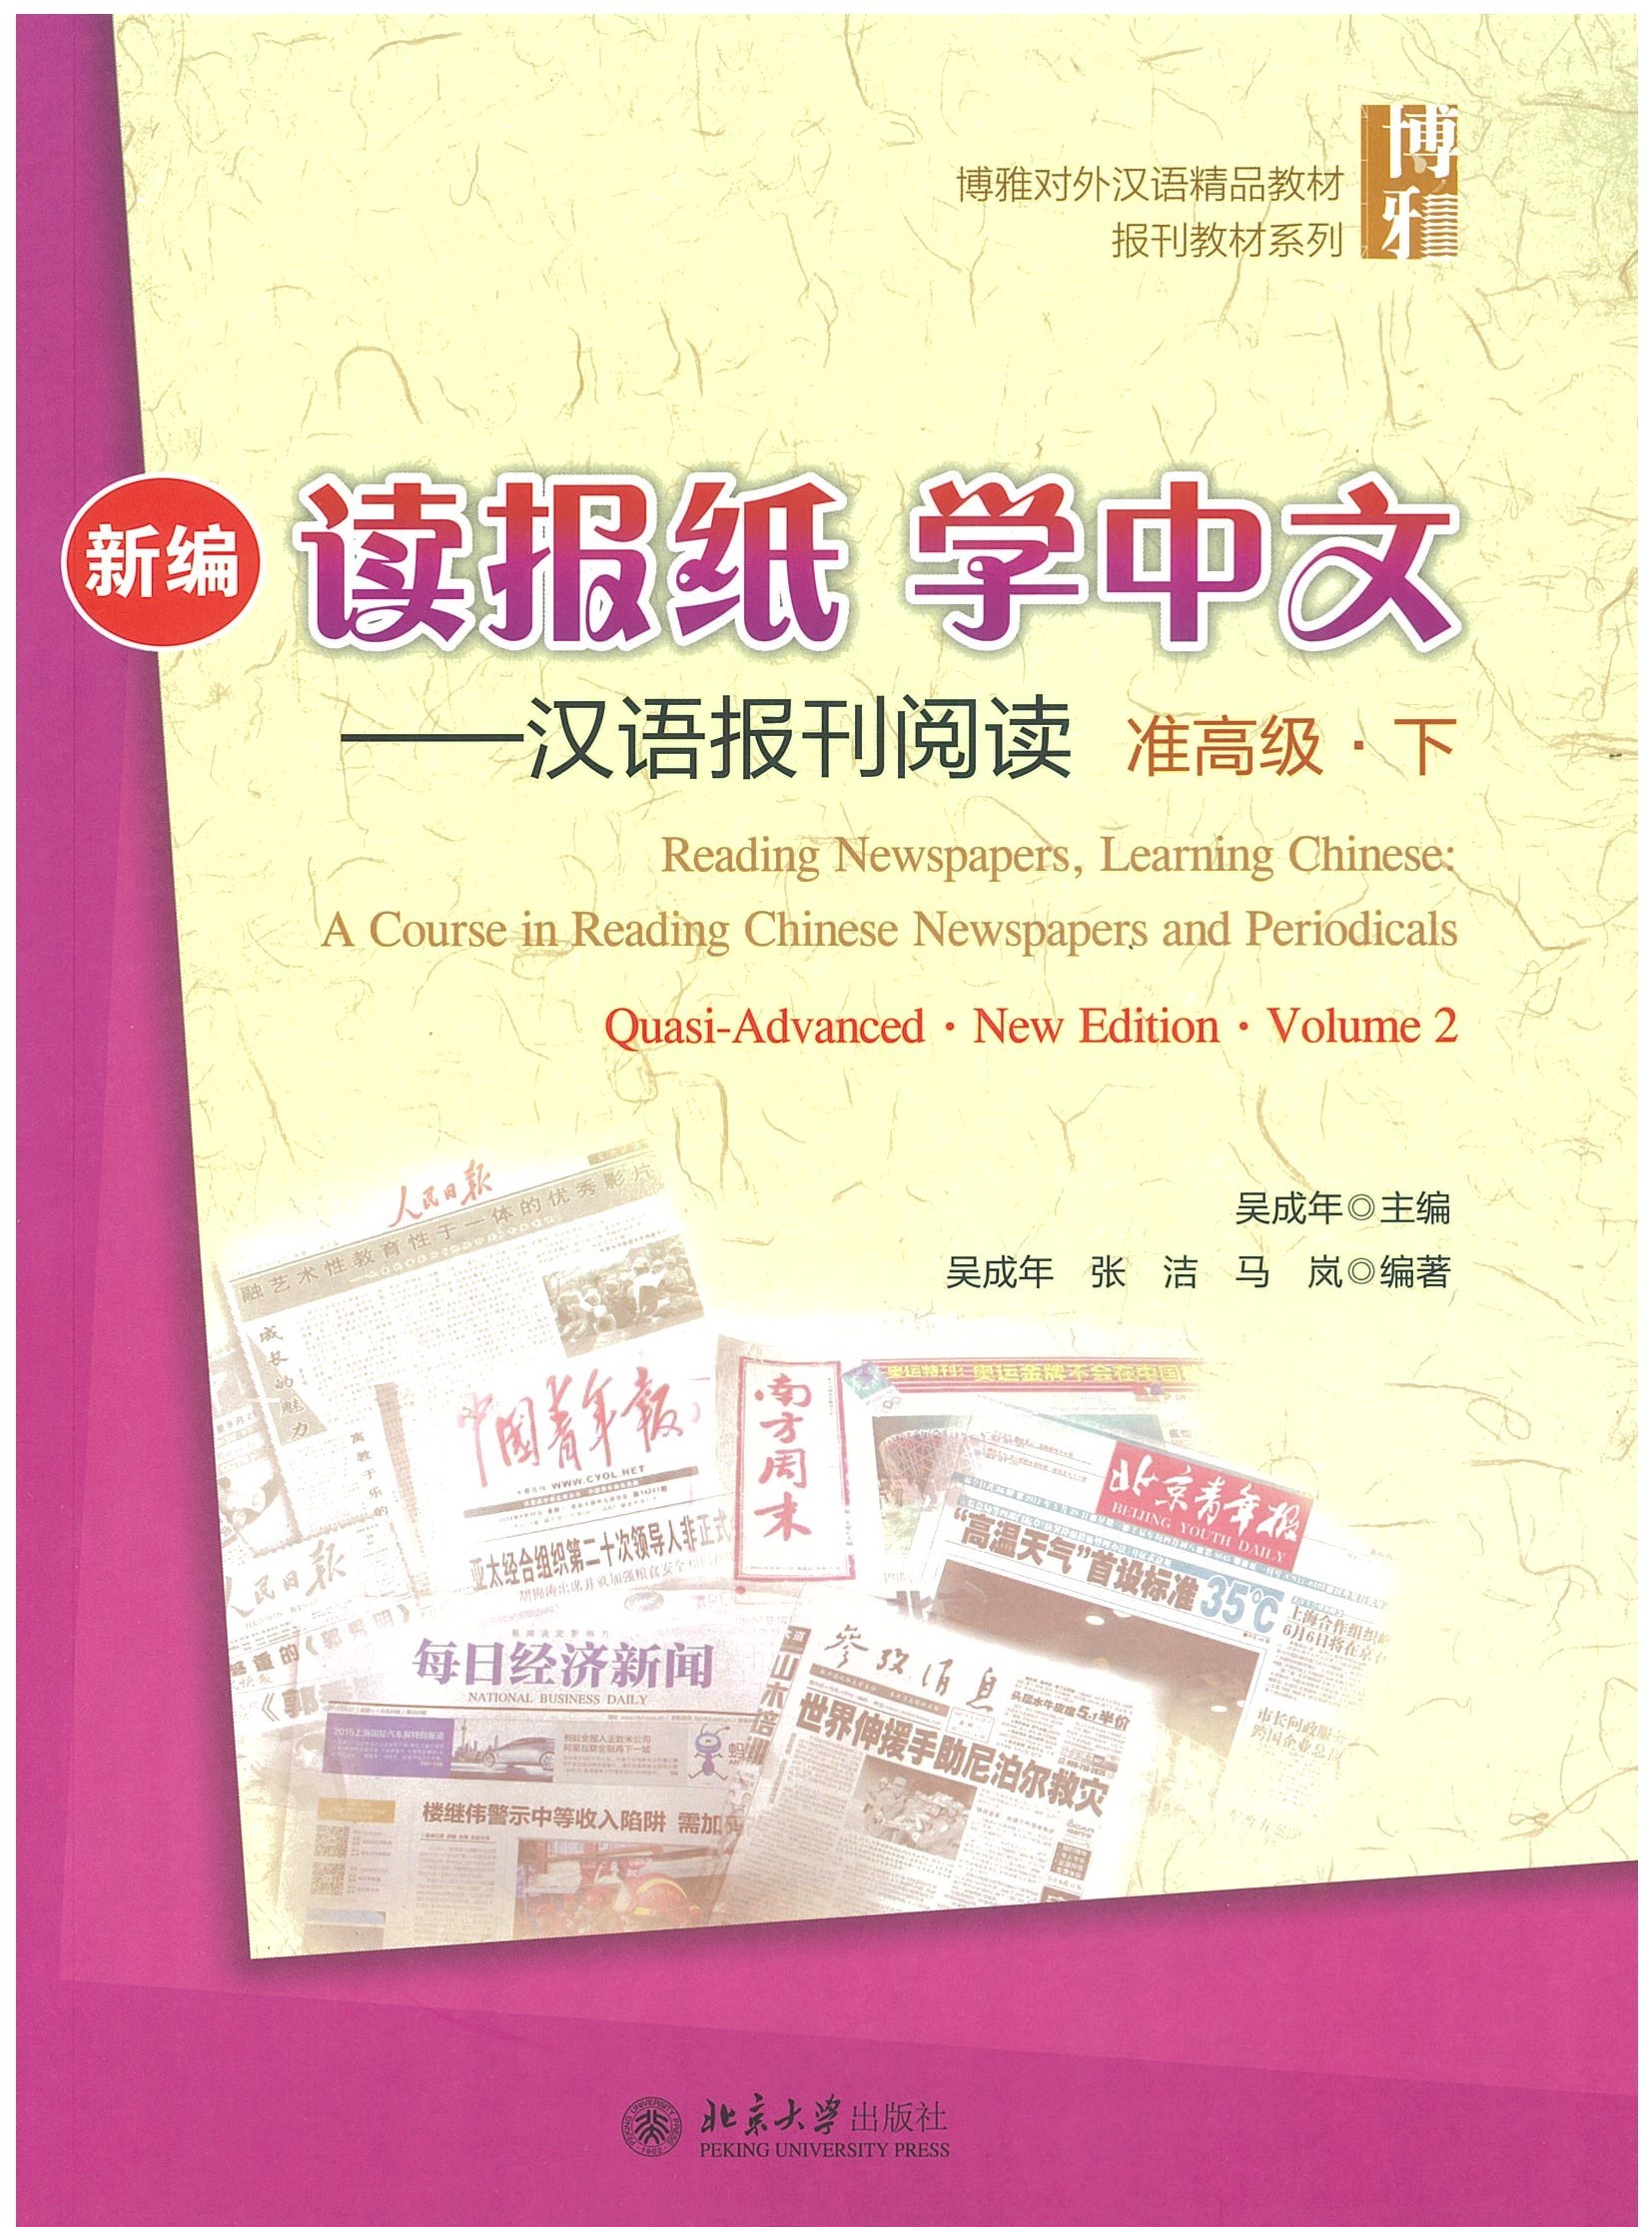 Reading Newspapers, Learning Chinese : A Course in Reading Chinese Newspapers and Periodicals (Quasi-Advanced New Edition Volume 2) 新编读报纸学中文 汉语报刊阅读 准高级 下